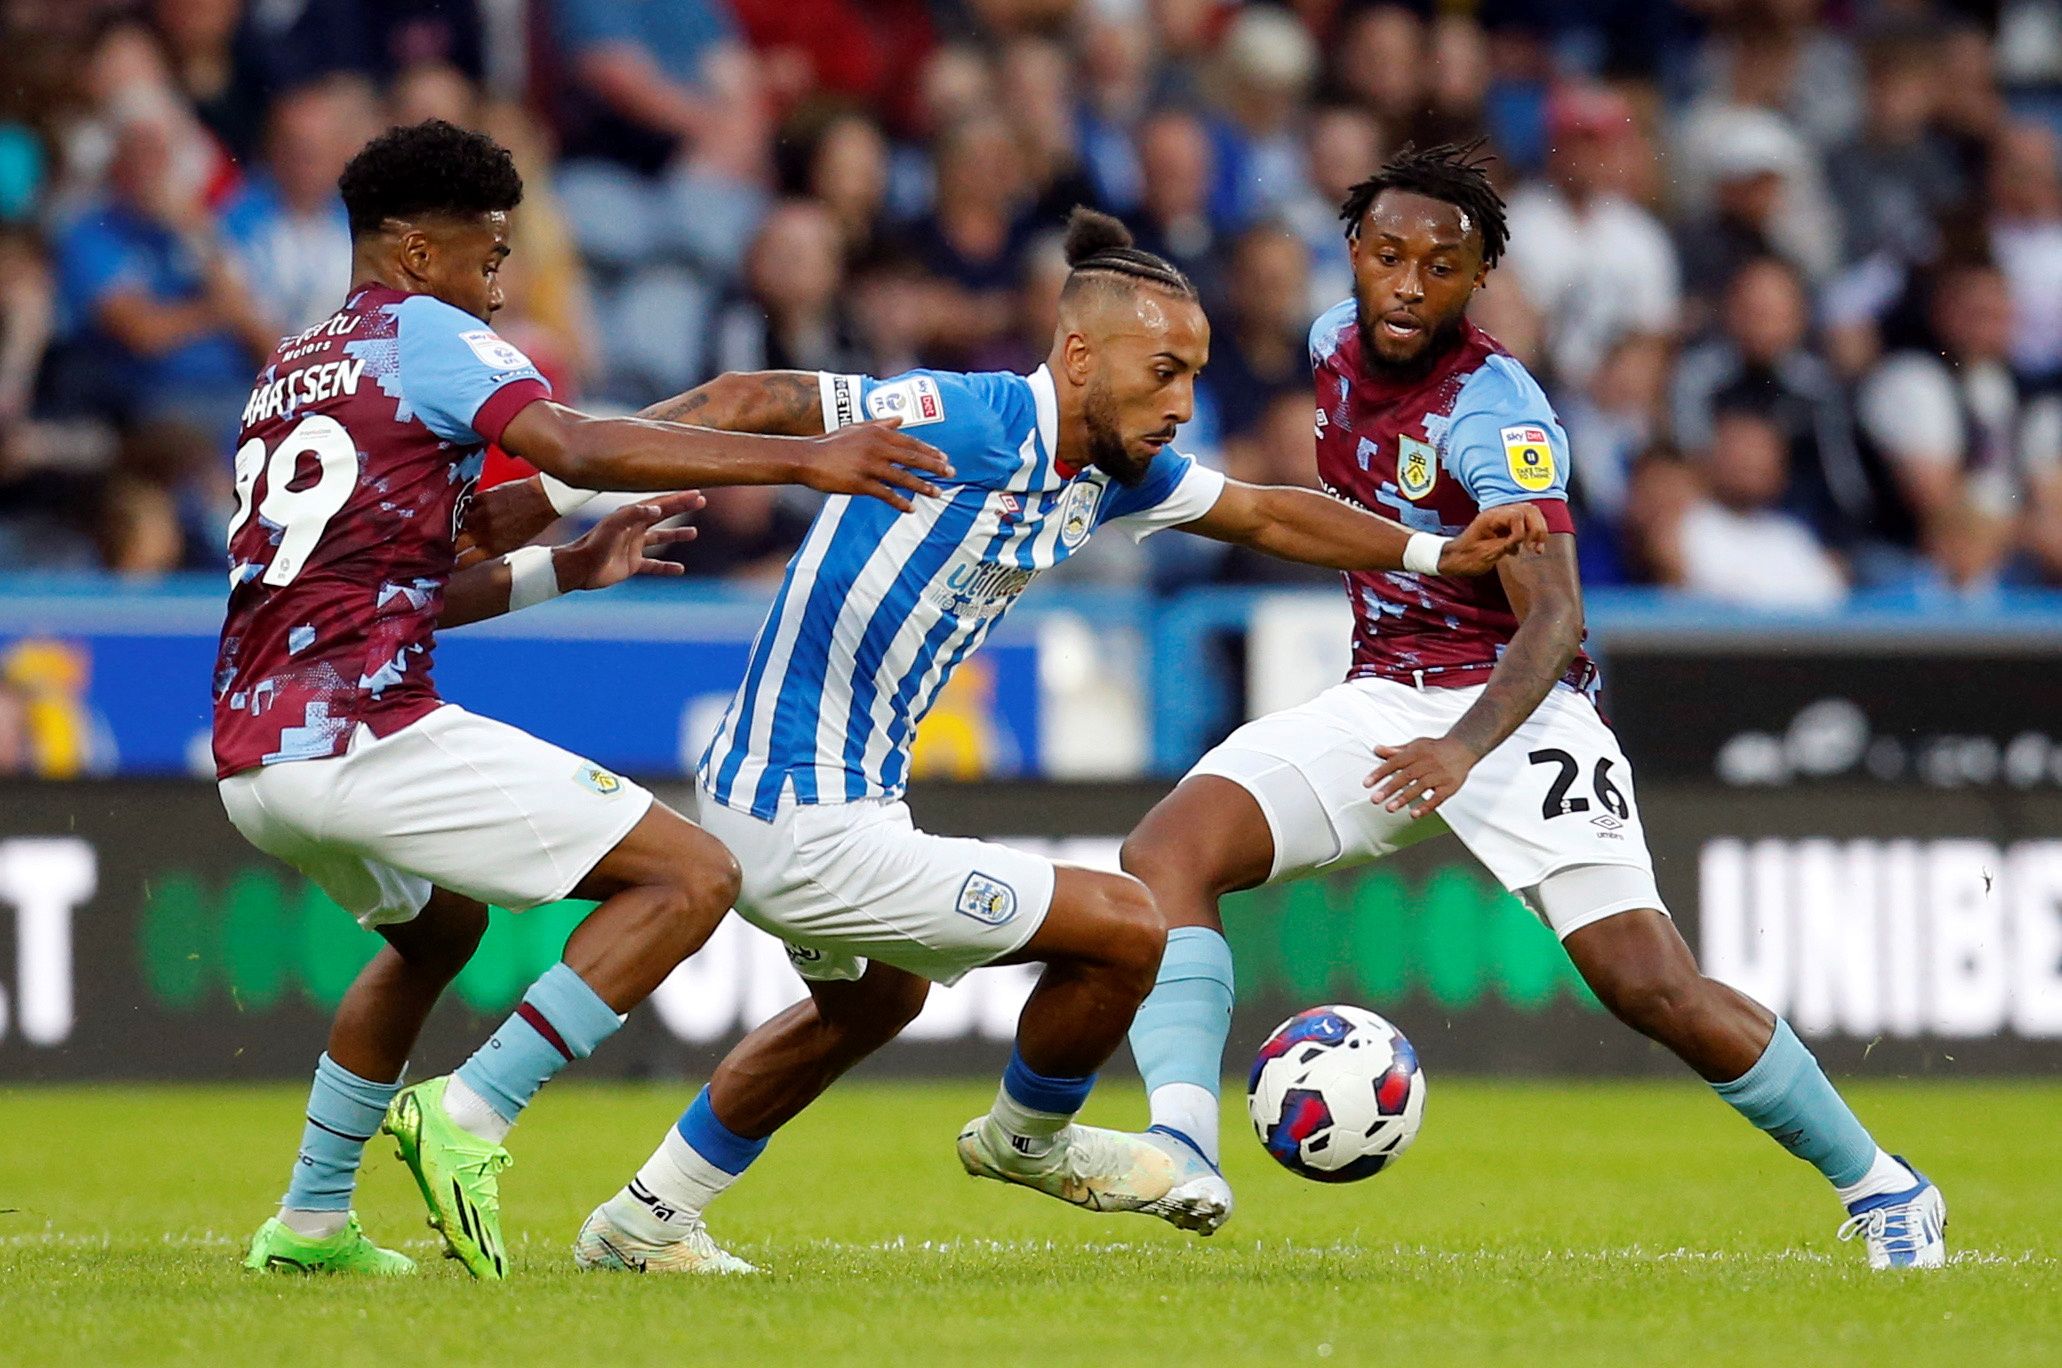 Soccer Football - Championship - Huddersfield Town v Burnley - John Smith's Stadium, Huddersfield, Britain - July 29, 2022  Huddersfield Town's Sorba Thomas in action with Burnley's Ian Maatsen and Samuel Bastien  Action Images/Ed Sykes  EDITORIAL USE ONLY. No use with unauthorized audio, video, data, fixture lists, club/league logos or "live" services. Online in-match use limited to 75 images, no video emulation. No use in betting, games or single club/league/player publications.  Please contac